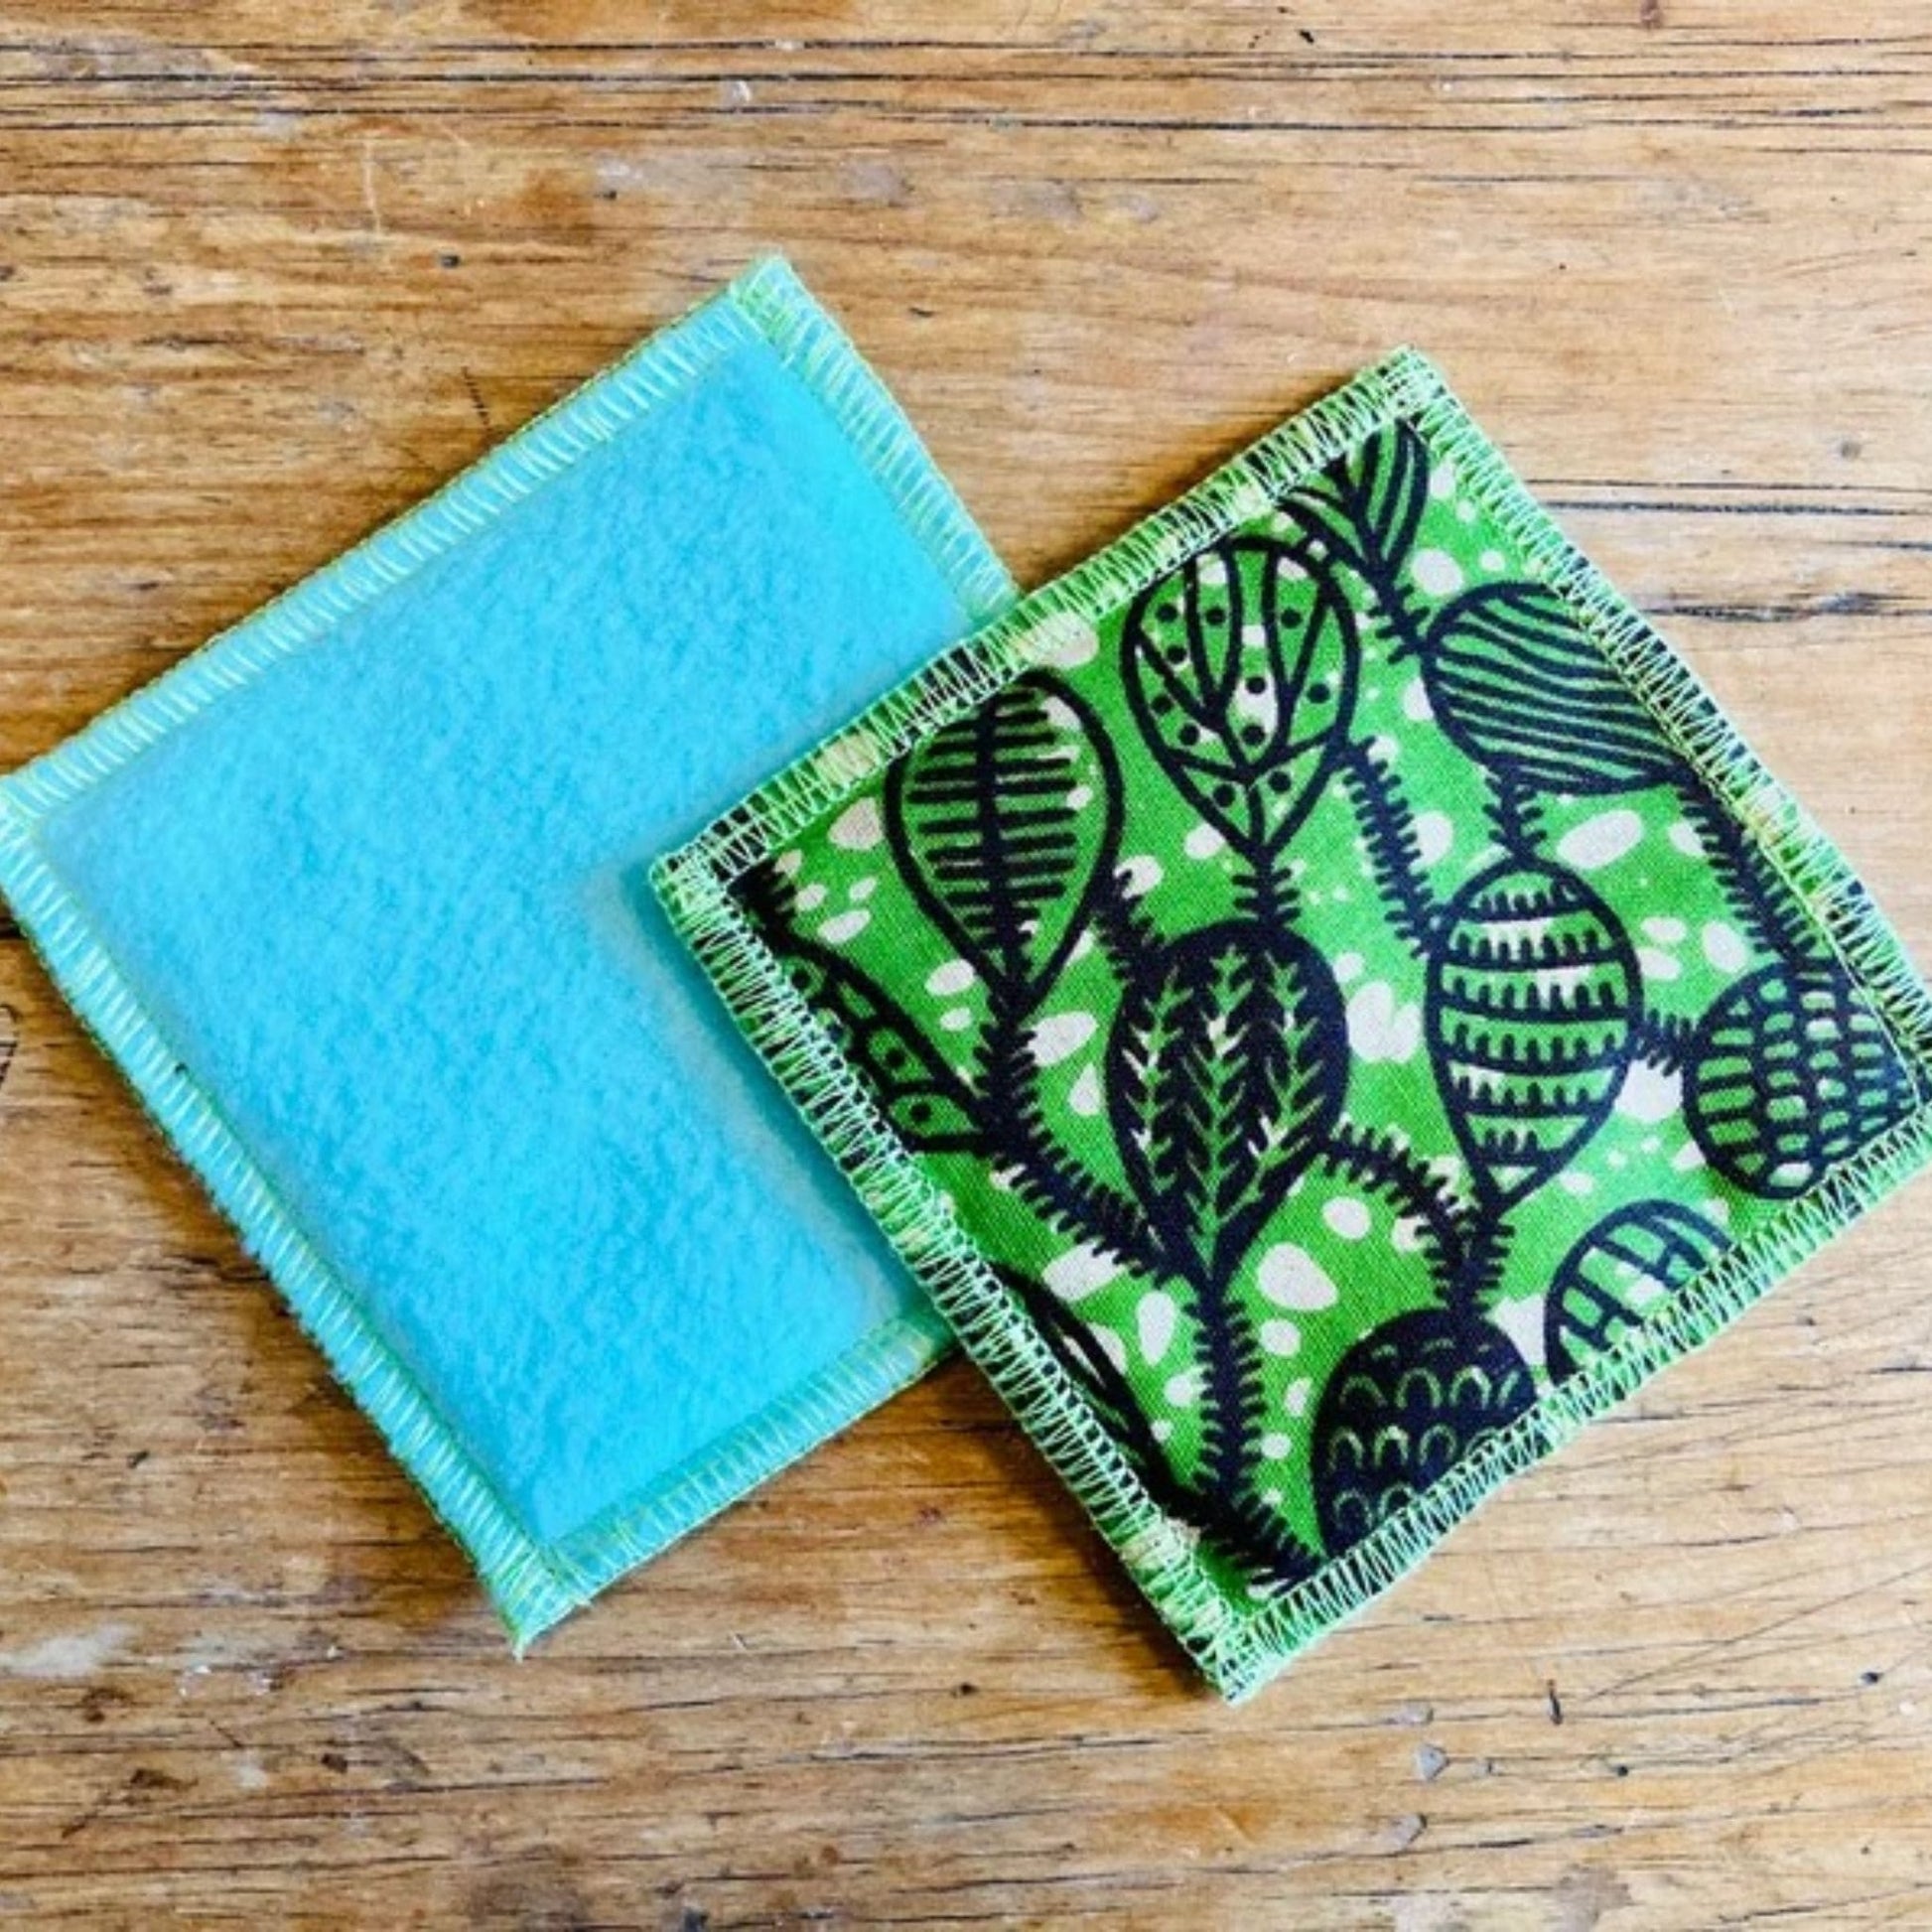 Reusable Makeup Remover Pads Gift Set - both sides of wipe